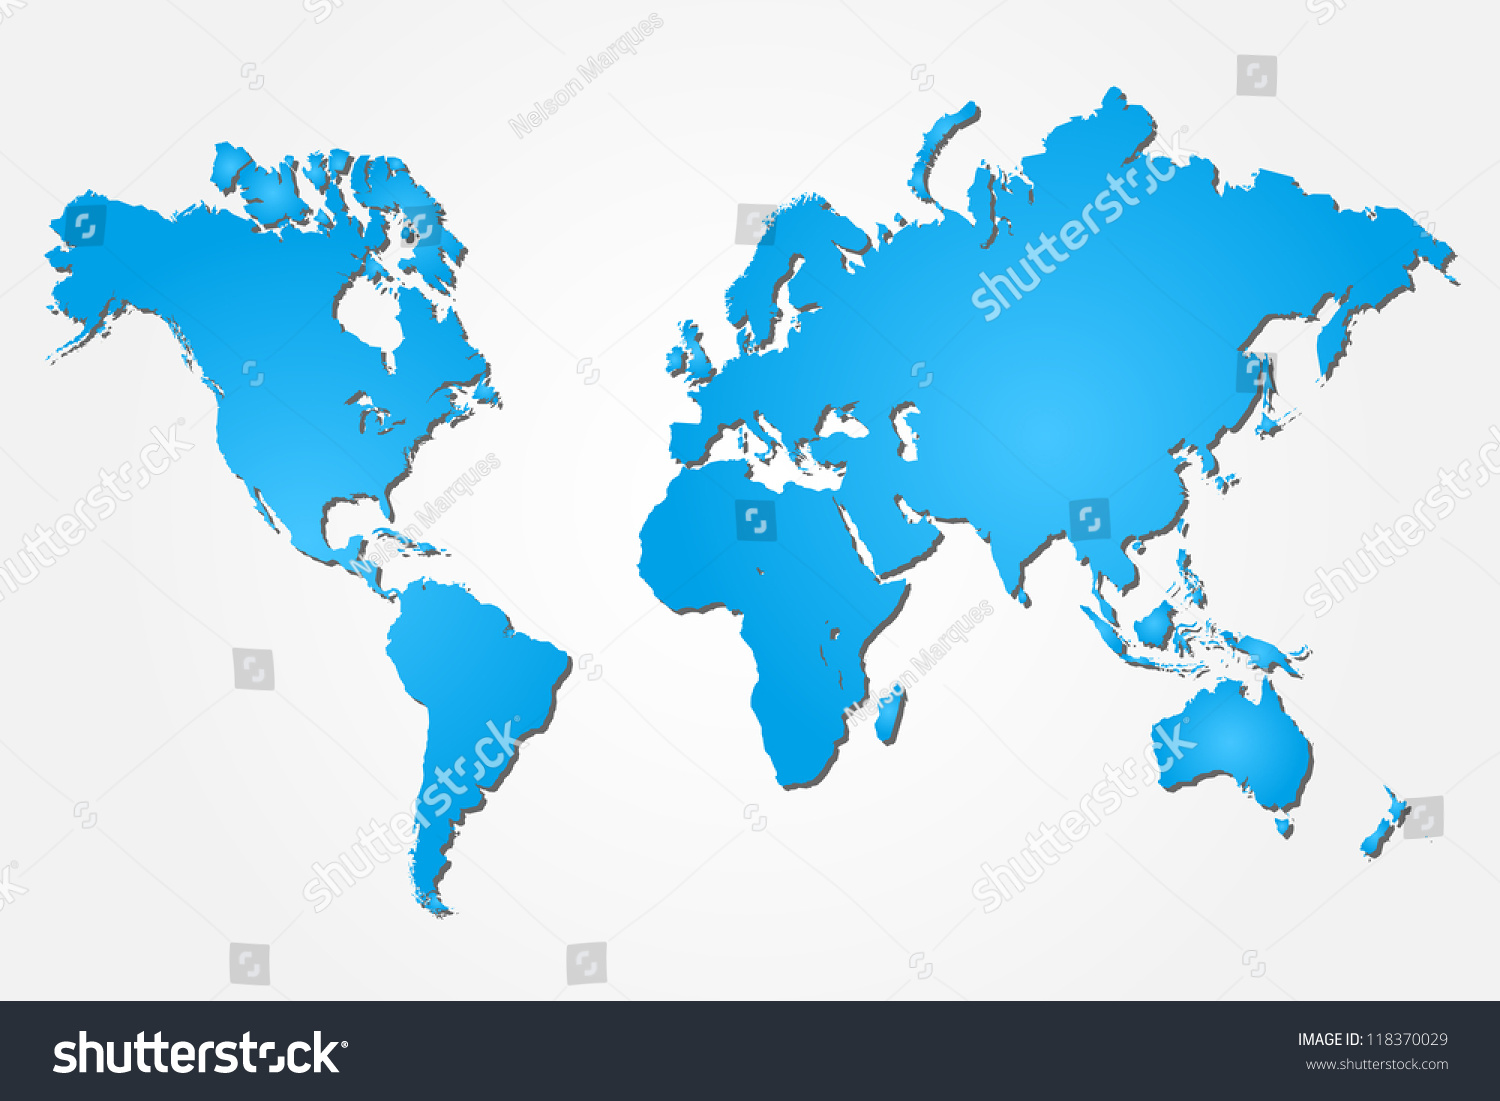 Image Of A Colorful Blue World Map Isolated On A White Background